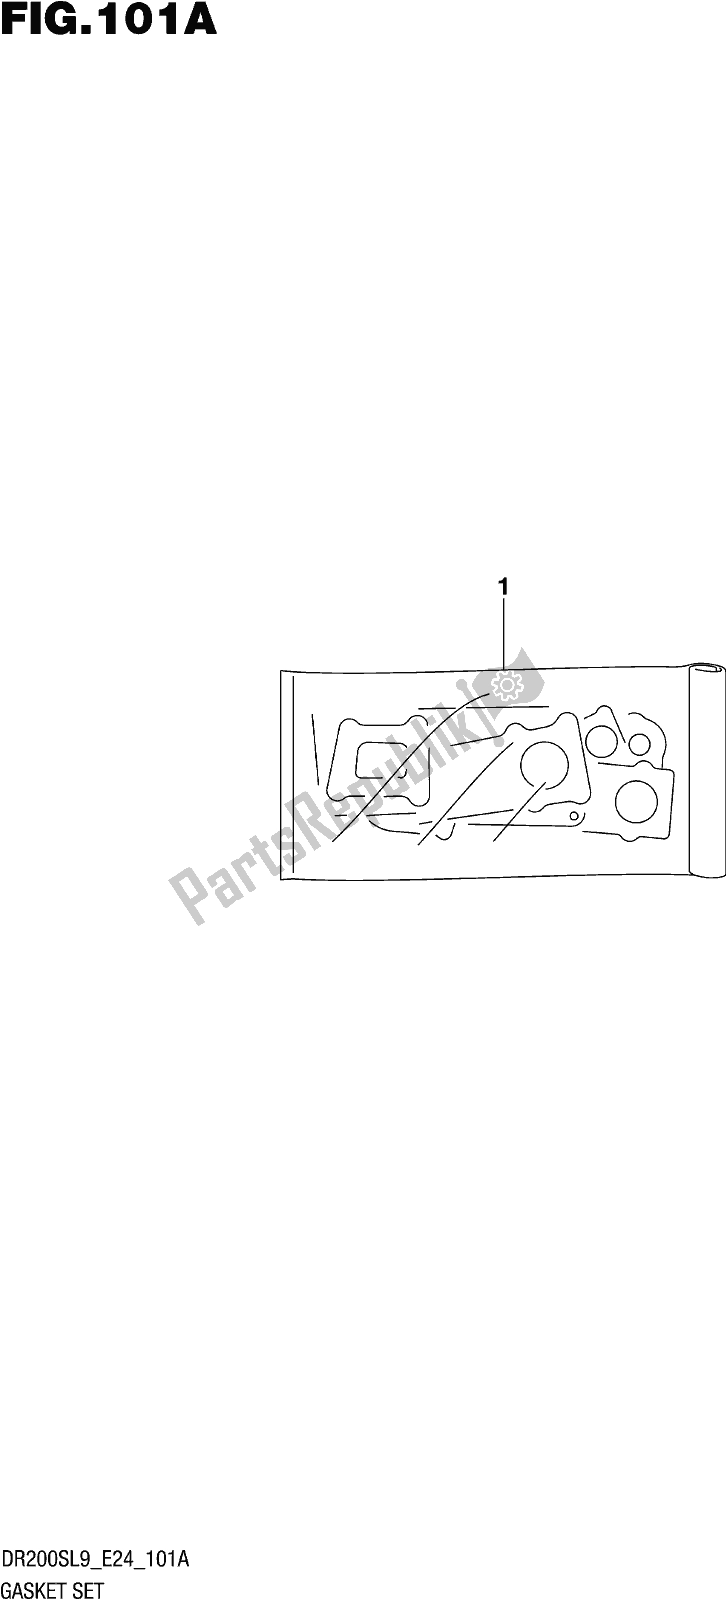 All parts for the Fig. 101a Gasket Set of the Suzuki DR 200S 2019